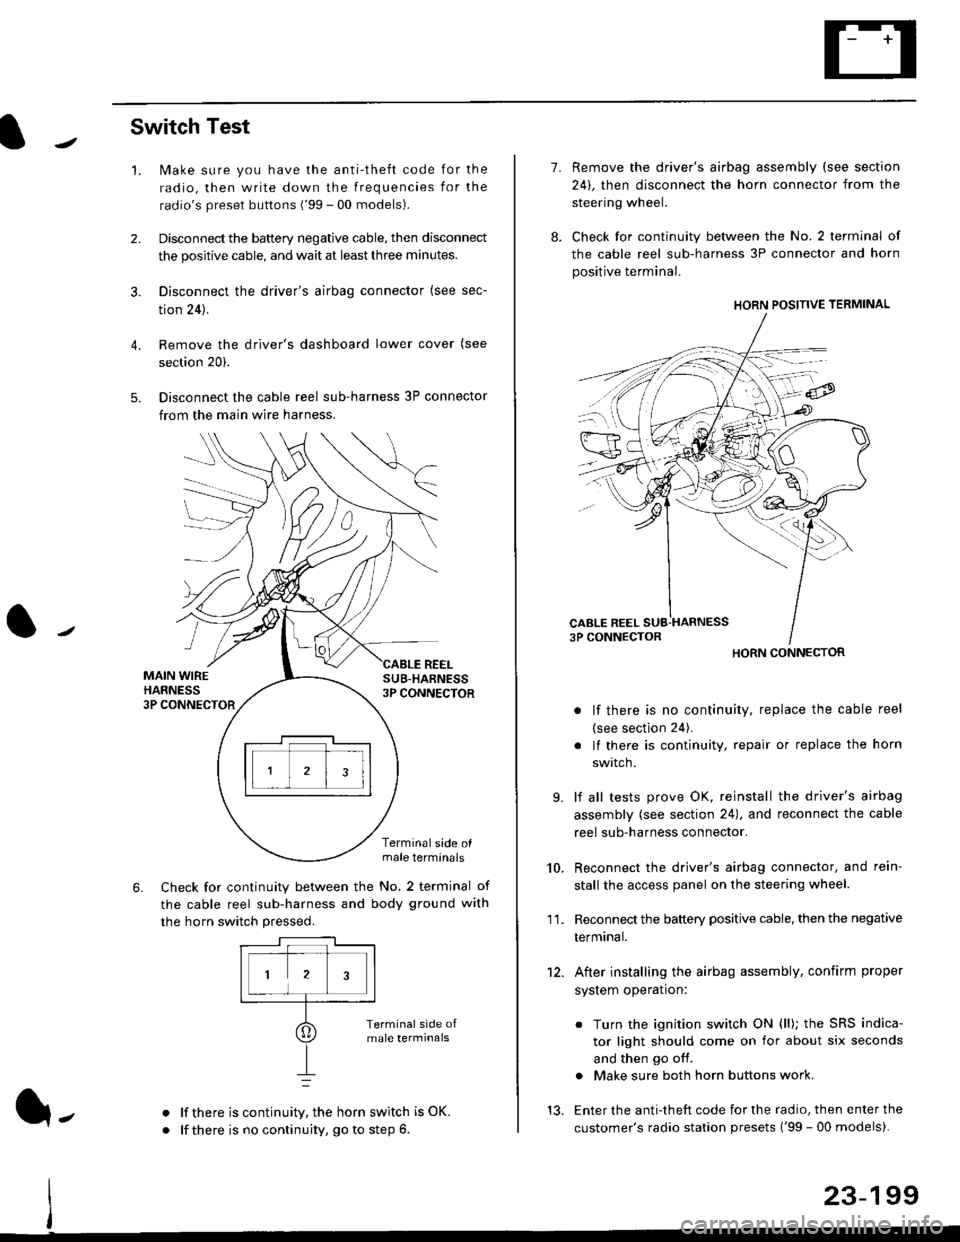 HONDA CIVIC 1997 6.G Service Manual Switch Test
lMake sure you have the anti-theft code for the
radio, then write down the frequencies for the
radios preset buttons (99 - 00 models).
Disconnect the battery negative cable, then disconn